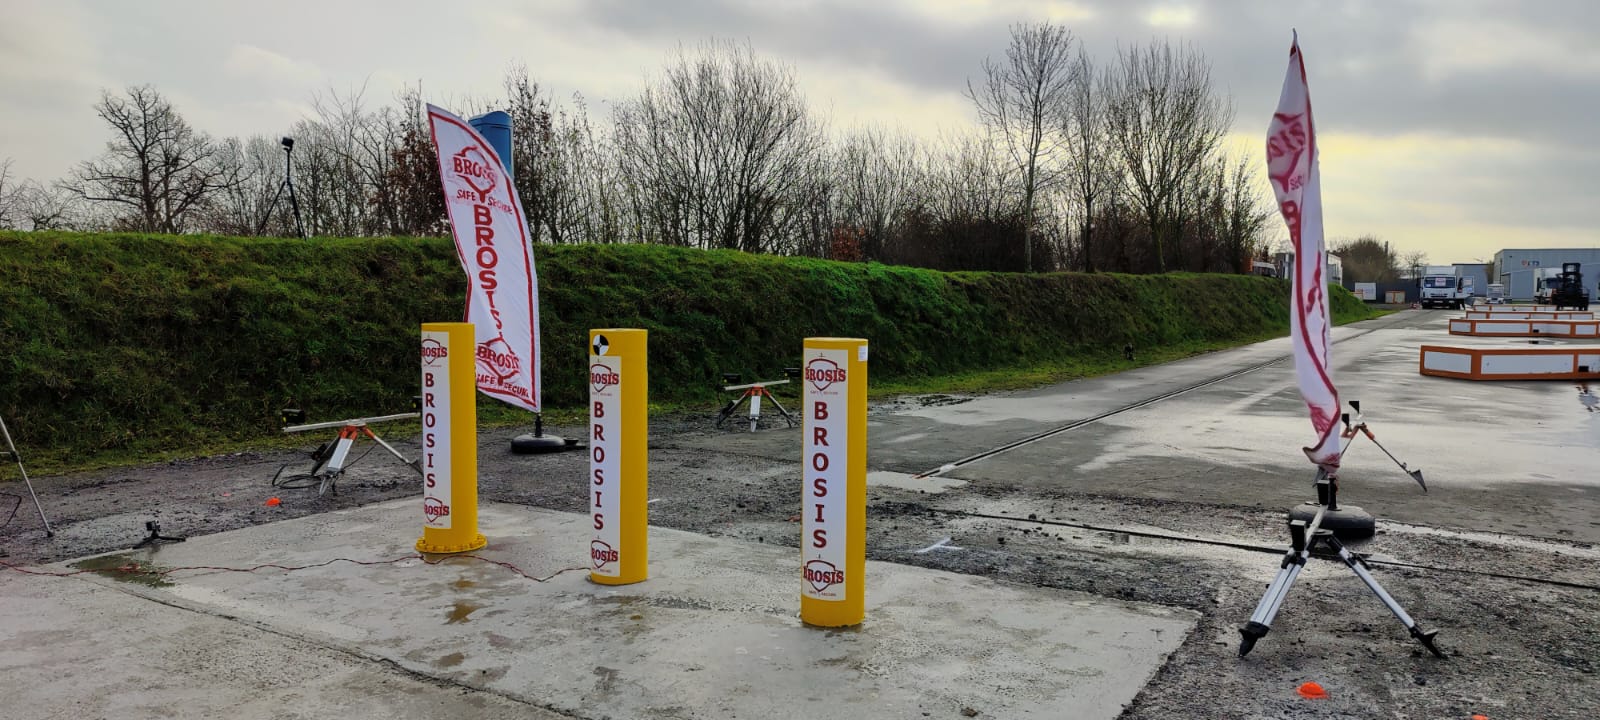 FORCE B12-250 (K12 Crash Rated Fixed bollards) manufacturers exporters in India Punjab Ludhiana